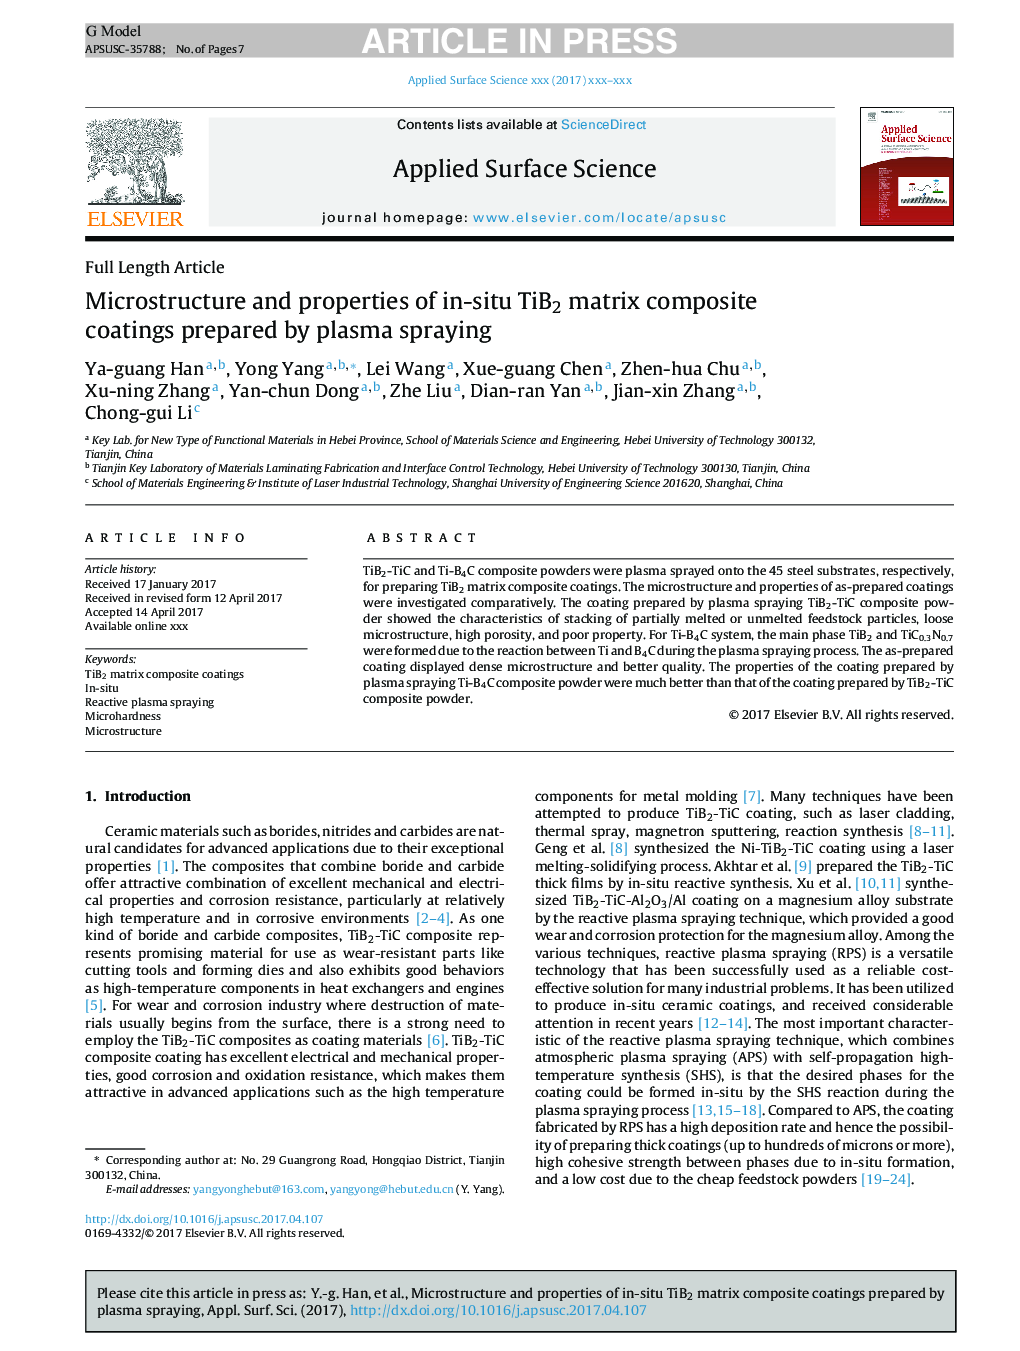 Microstructure and properties of in-situ TiB2 matrix composite coatings prepared by plasma spraying